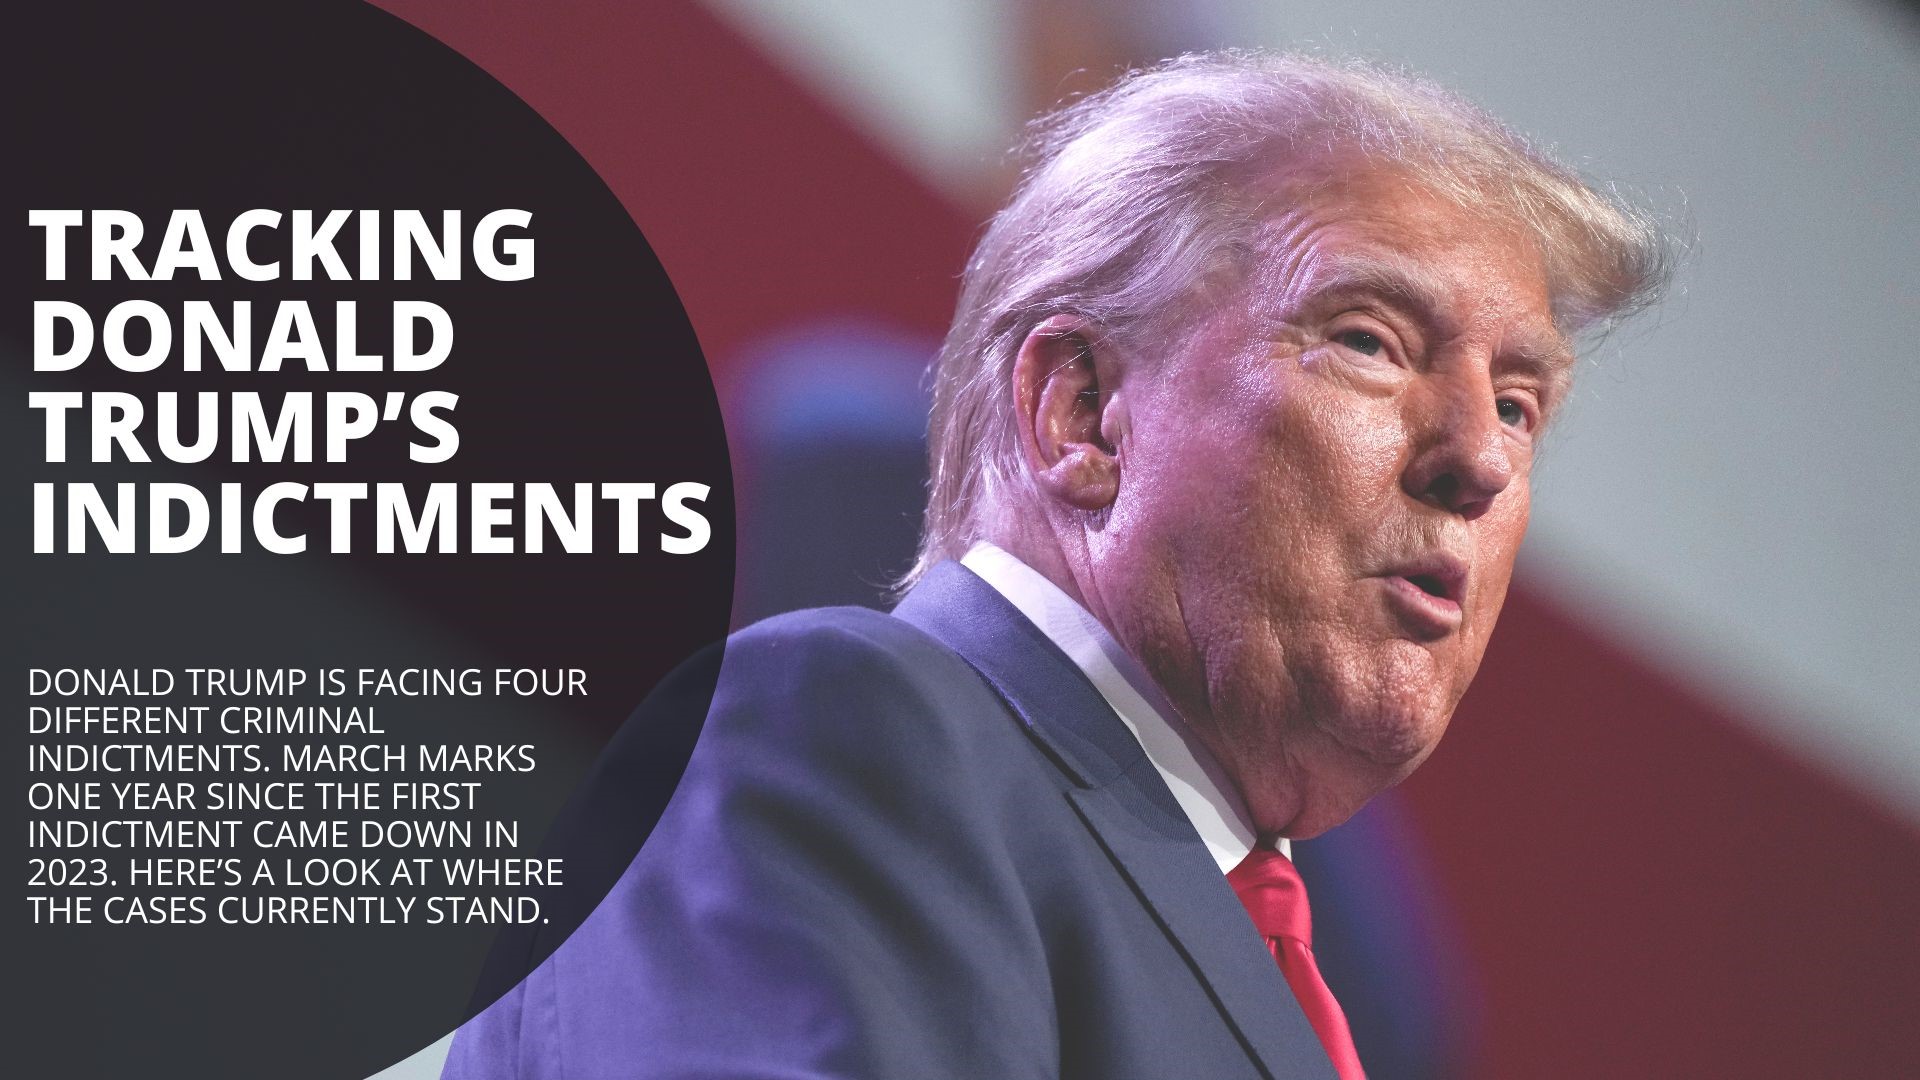 Donald Trump is facing four different criminal indictments. March marks one year since the first indictment came in 2023. Here’s a look at where the cases stand.